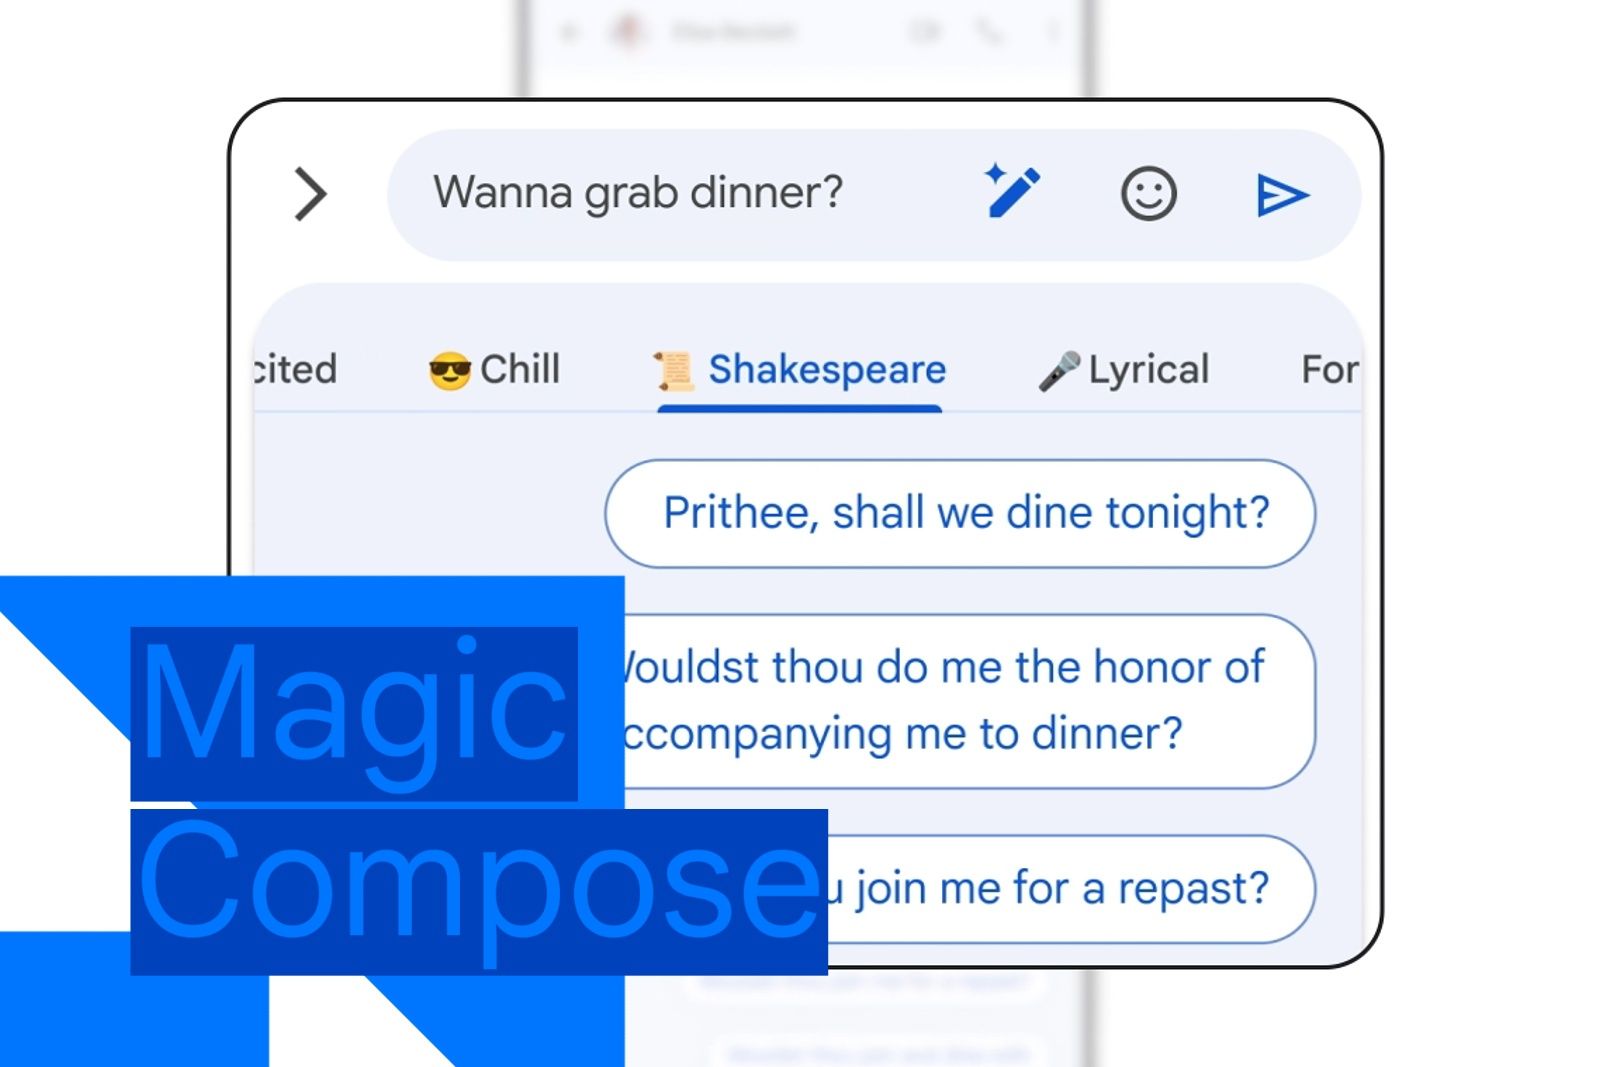 How to use AI-based Magic Compose in Google Messages